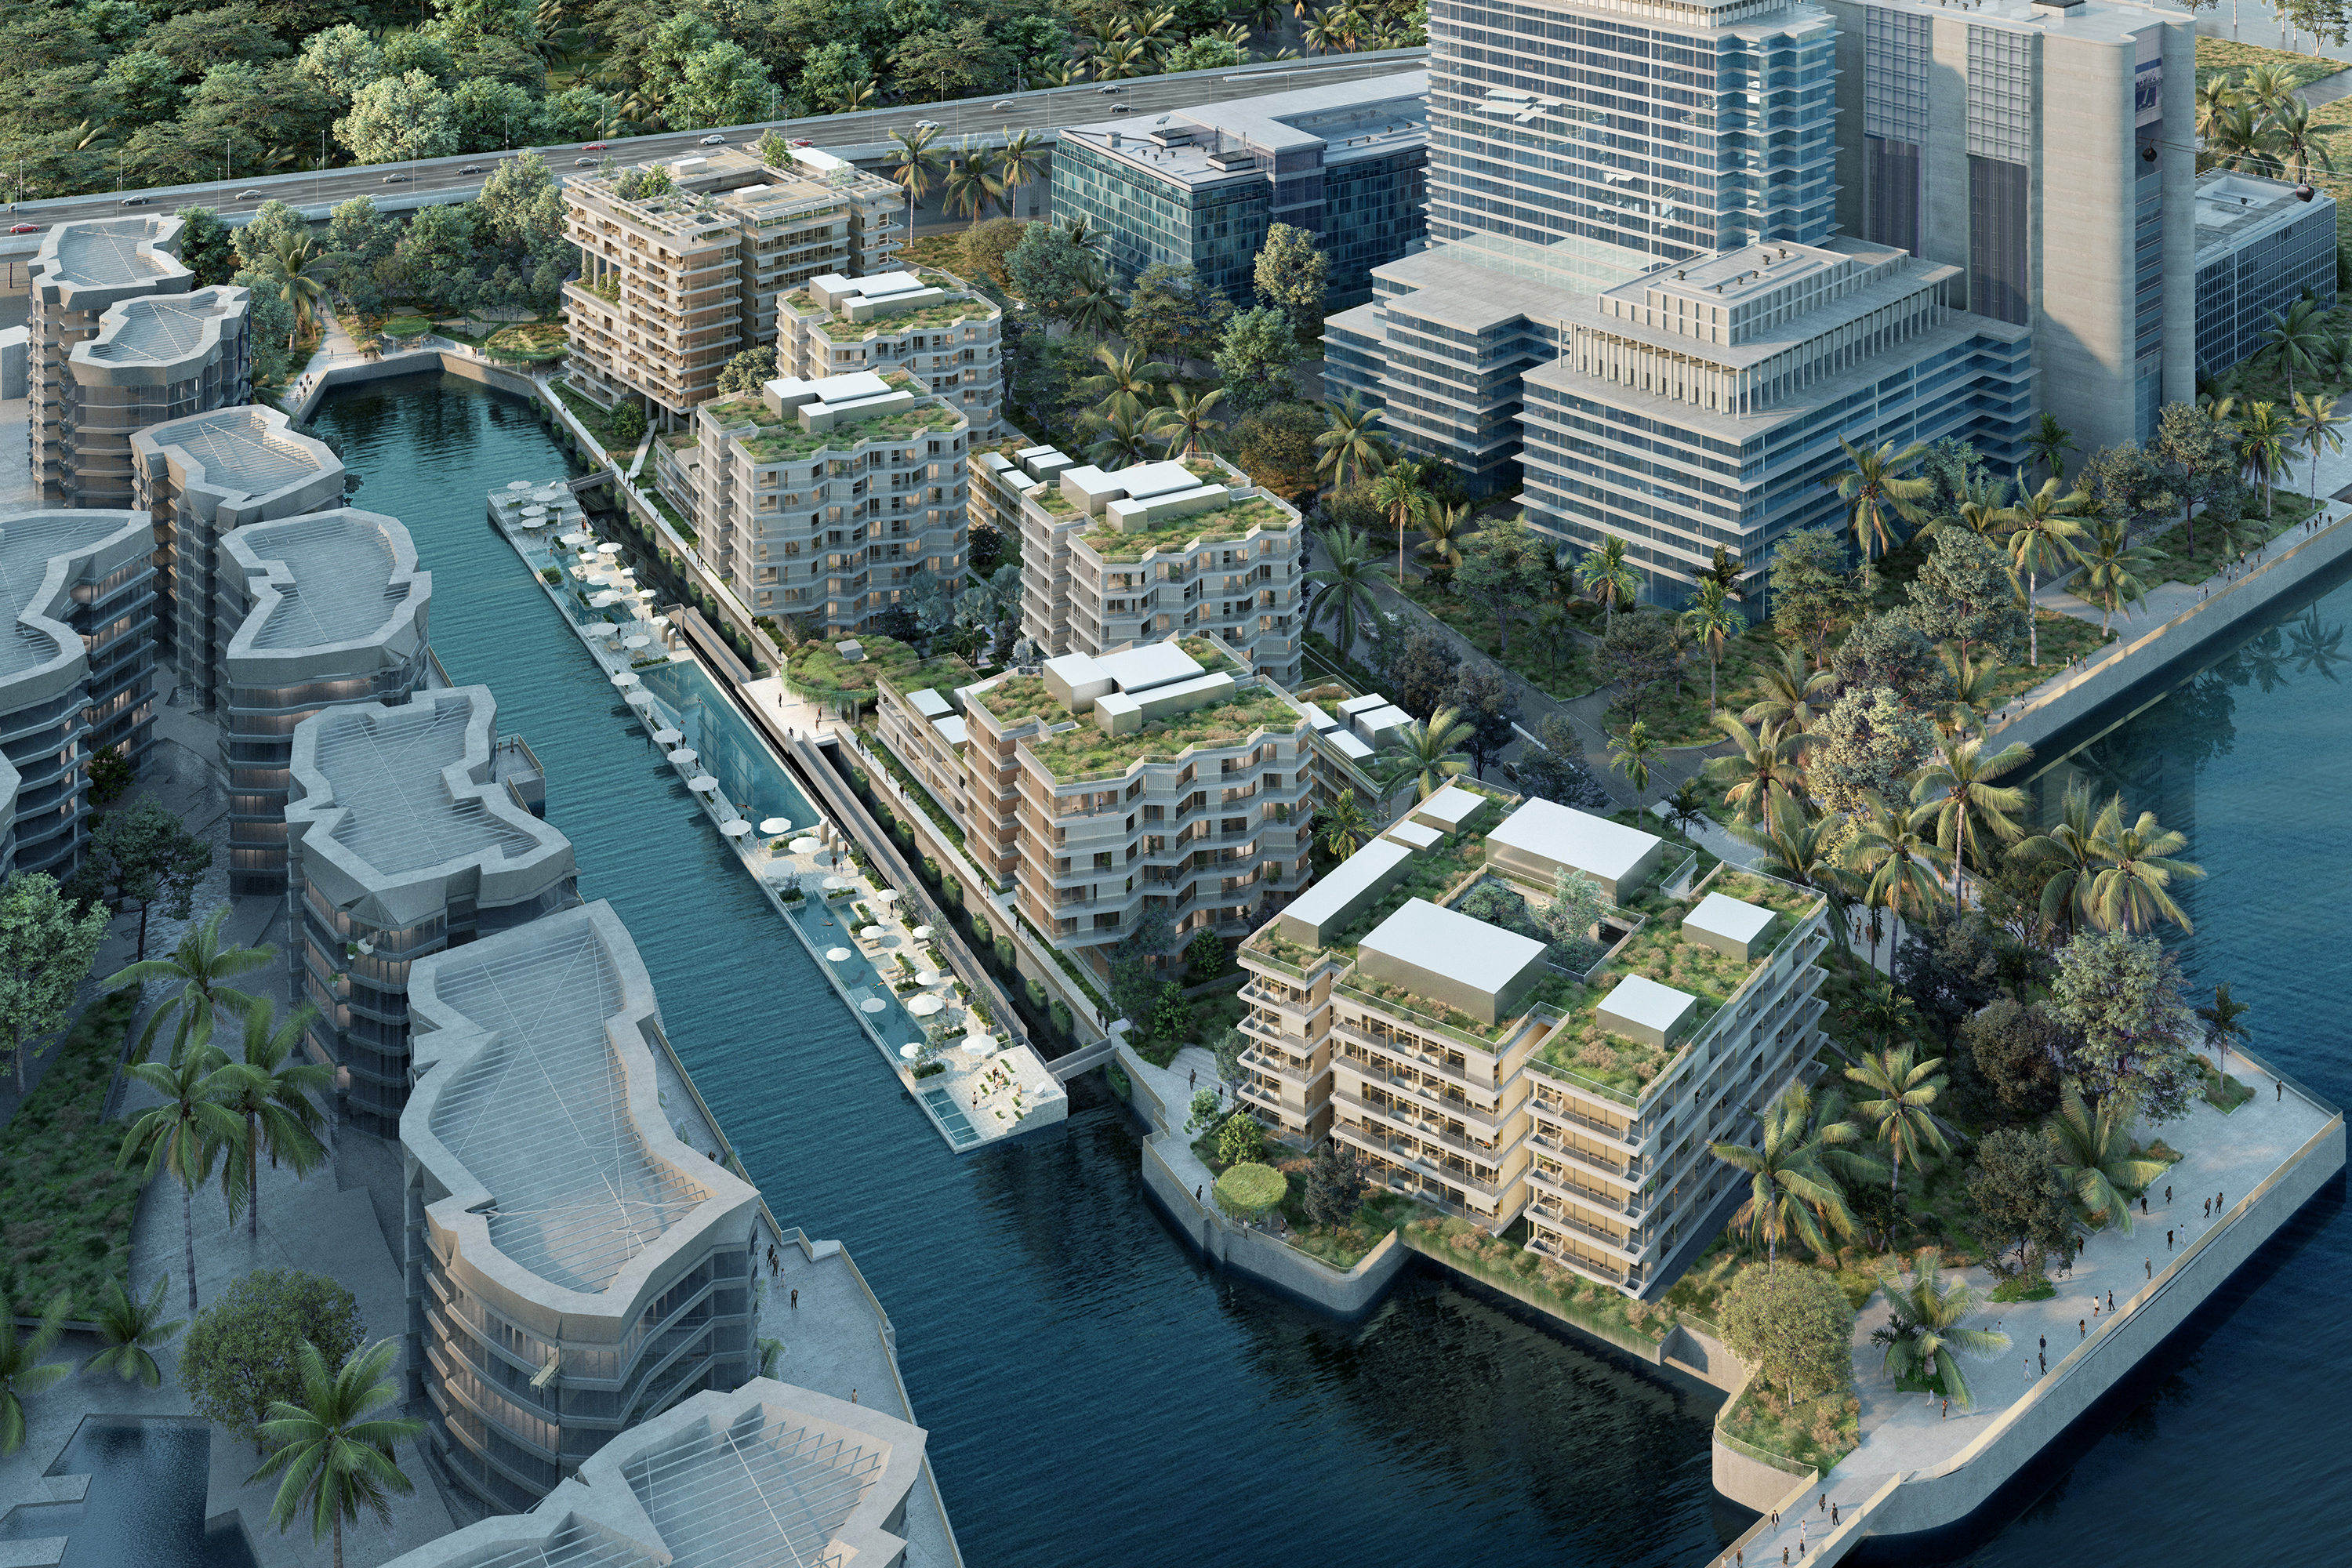 Construction begins for The Reef at King’s Dock in Singapore